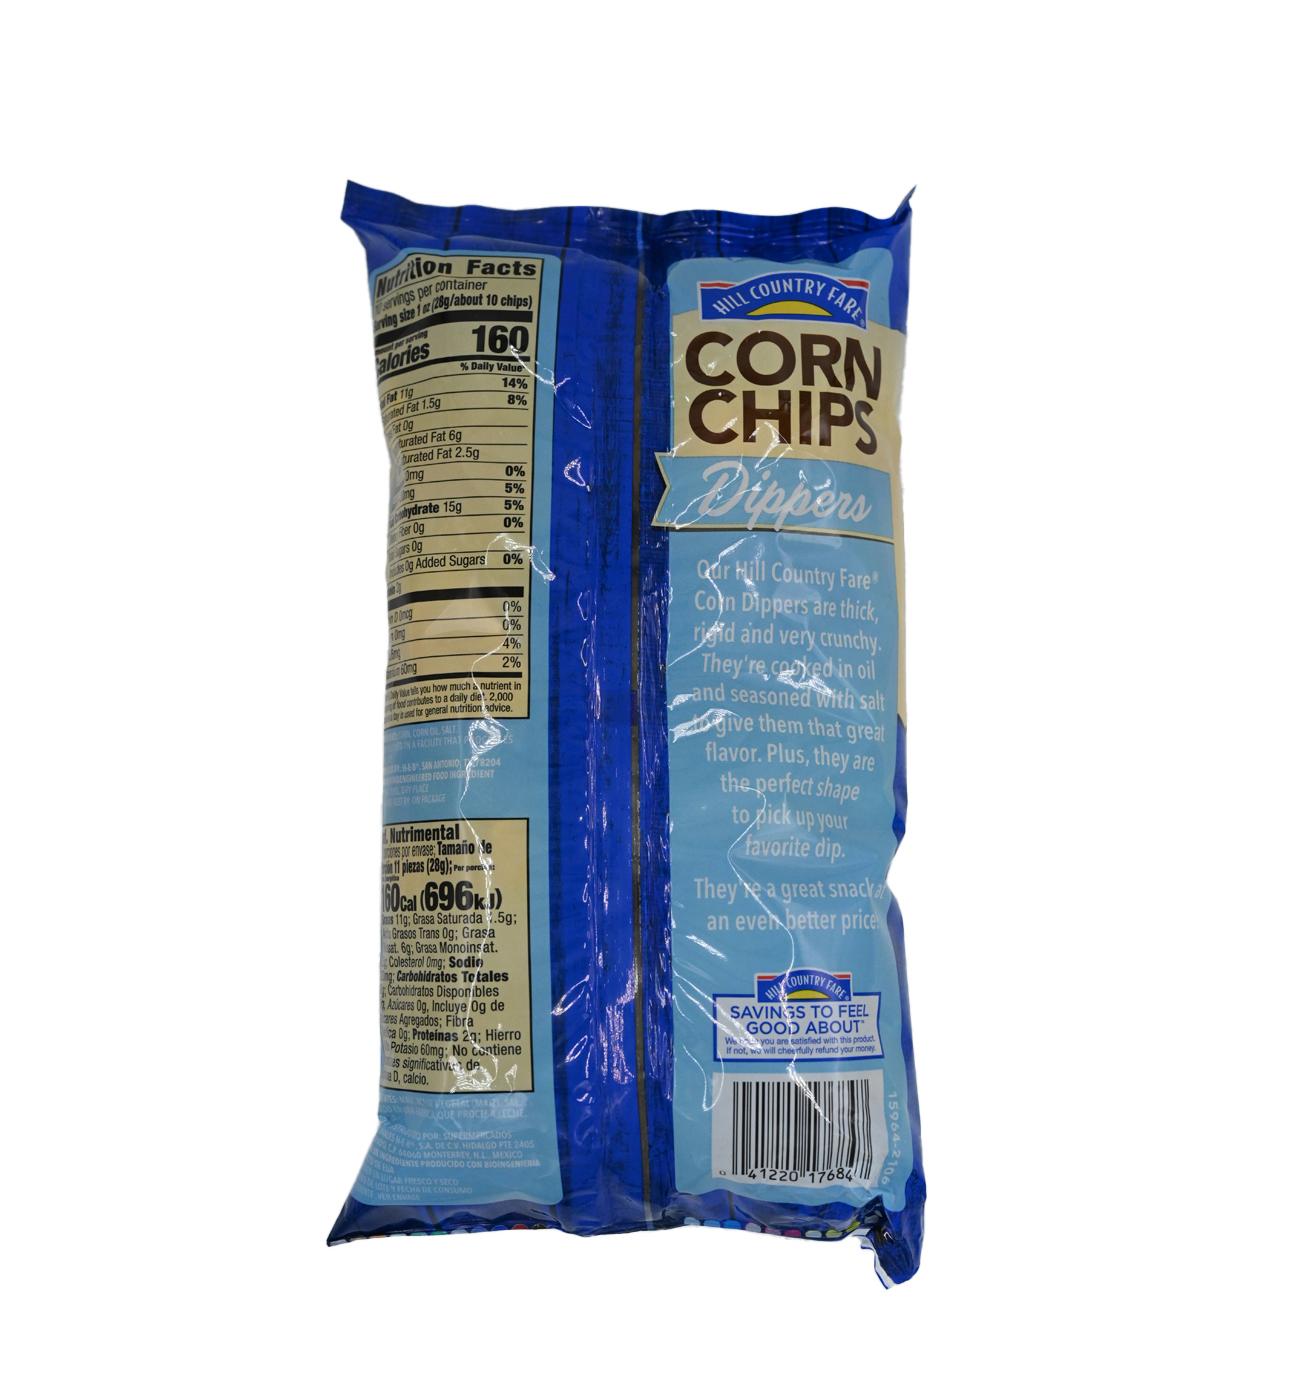 Hill Country Fare Corn Chips Dippers; image 2 of 2